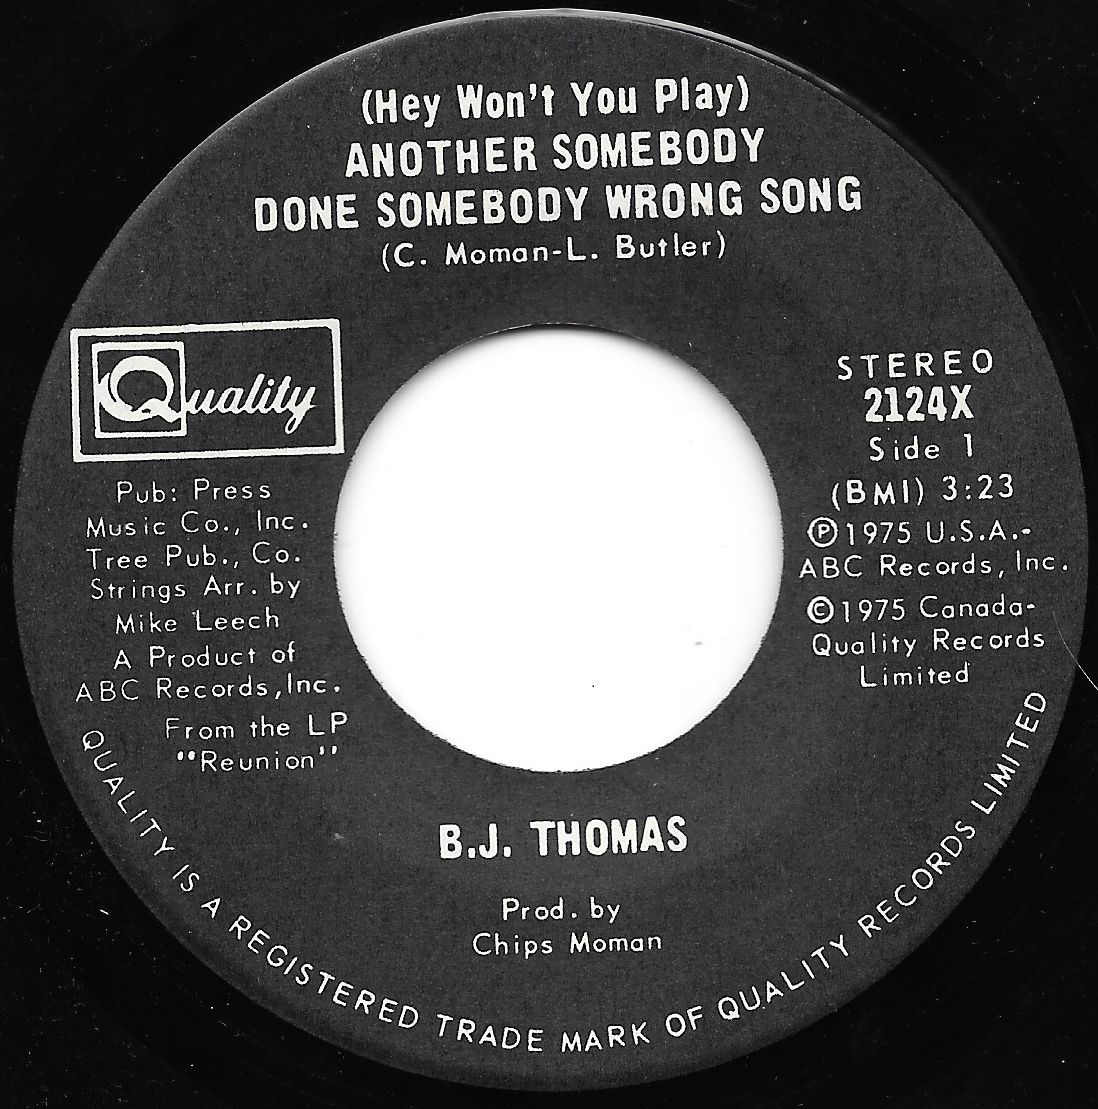 Acheter disque vinyle B.J. Thomas Another Somebody Done Somebody Wrong Song  / City Boys a vendre